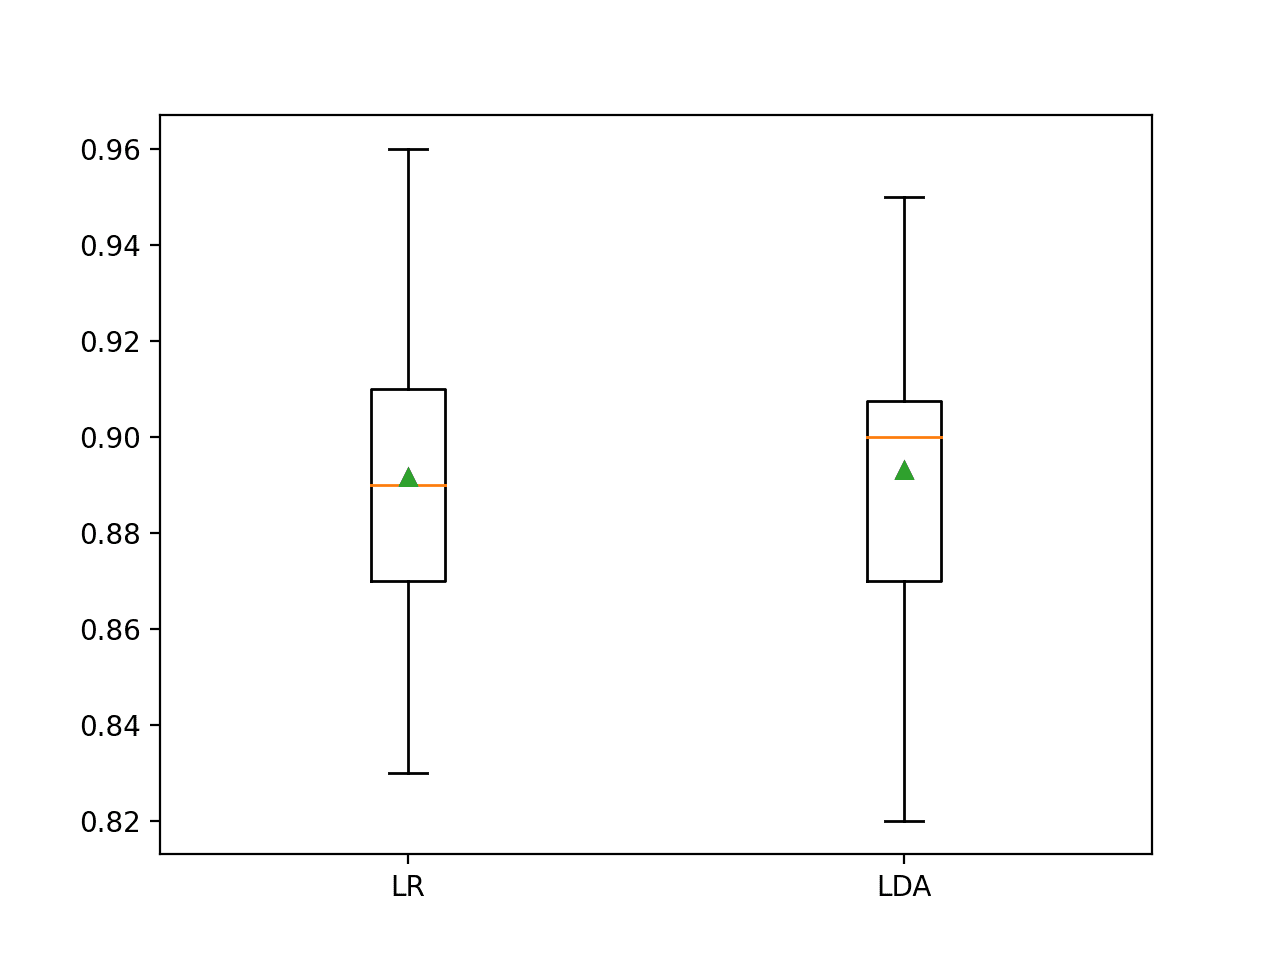 Box and Whisker Plot of Classification Accuracy Scores for Two Algorithms